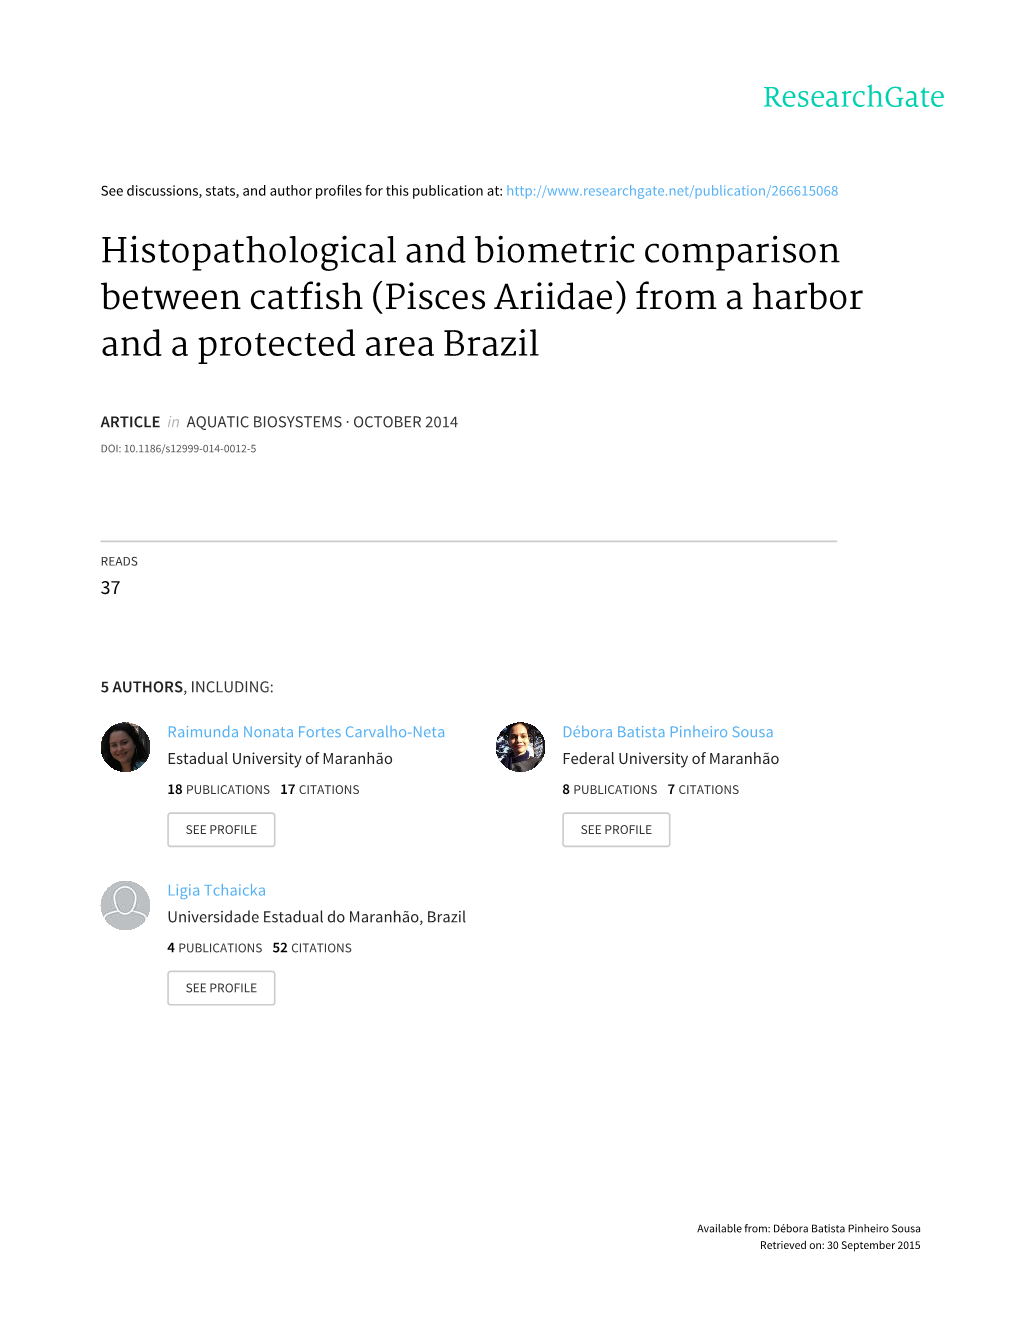 Histopathological and Biometric Comparison Between Catfish (Pisces Ariidae) from a Harbor and a Protected Area Brazil